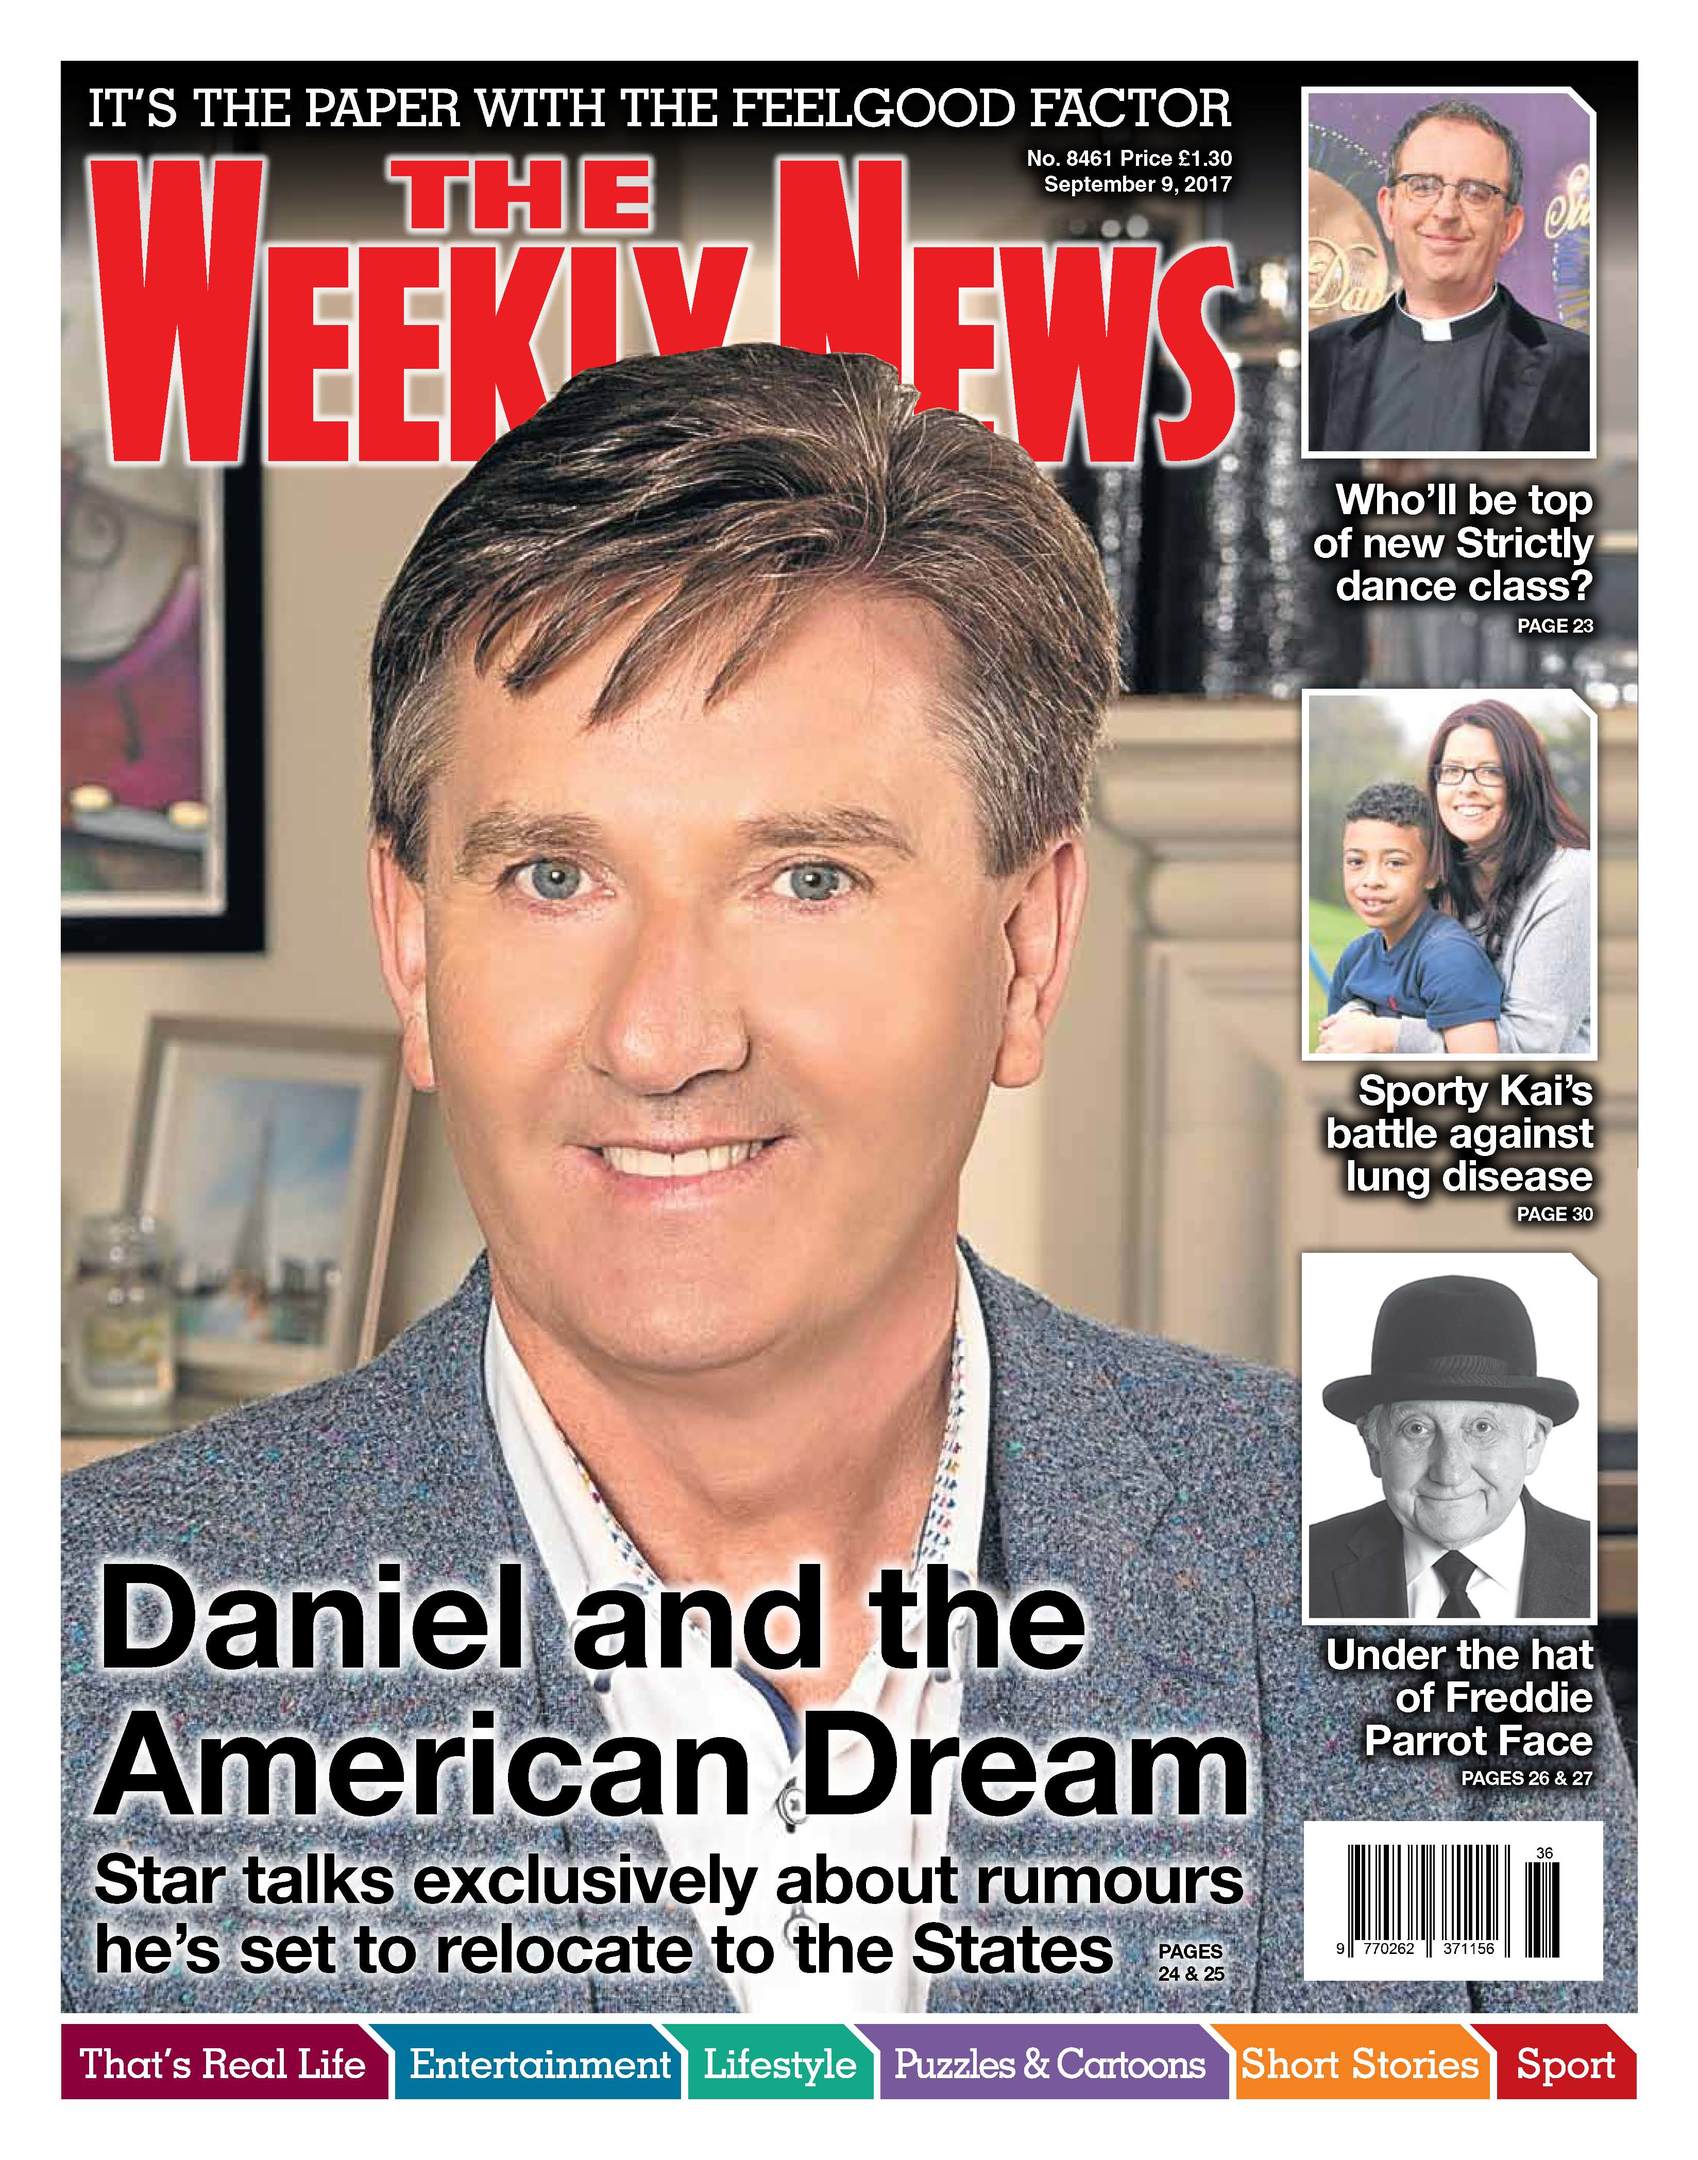 Daniel was this week's Weekly News cover star. Get your copy of the paper with the feelgood factor, on sale Wednesdays